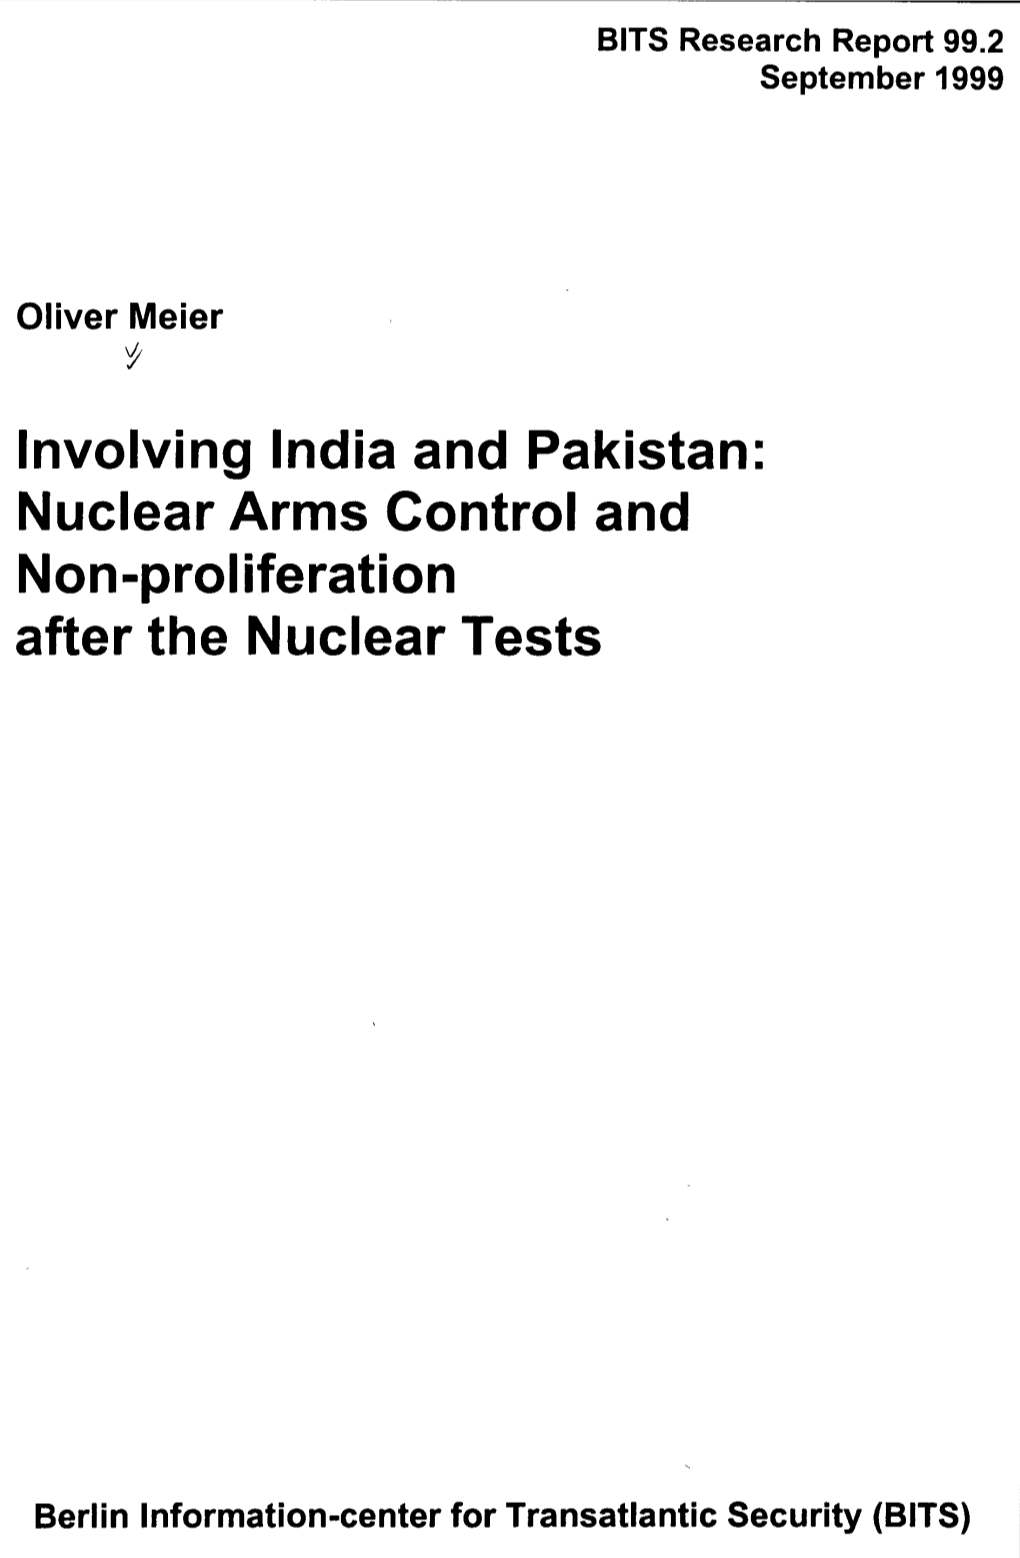 Involving India and Pakistan Nuclear Arms Control and Non-Proliferation After the Nuclear Tests